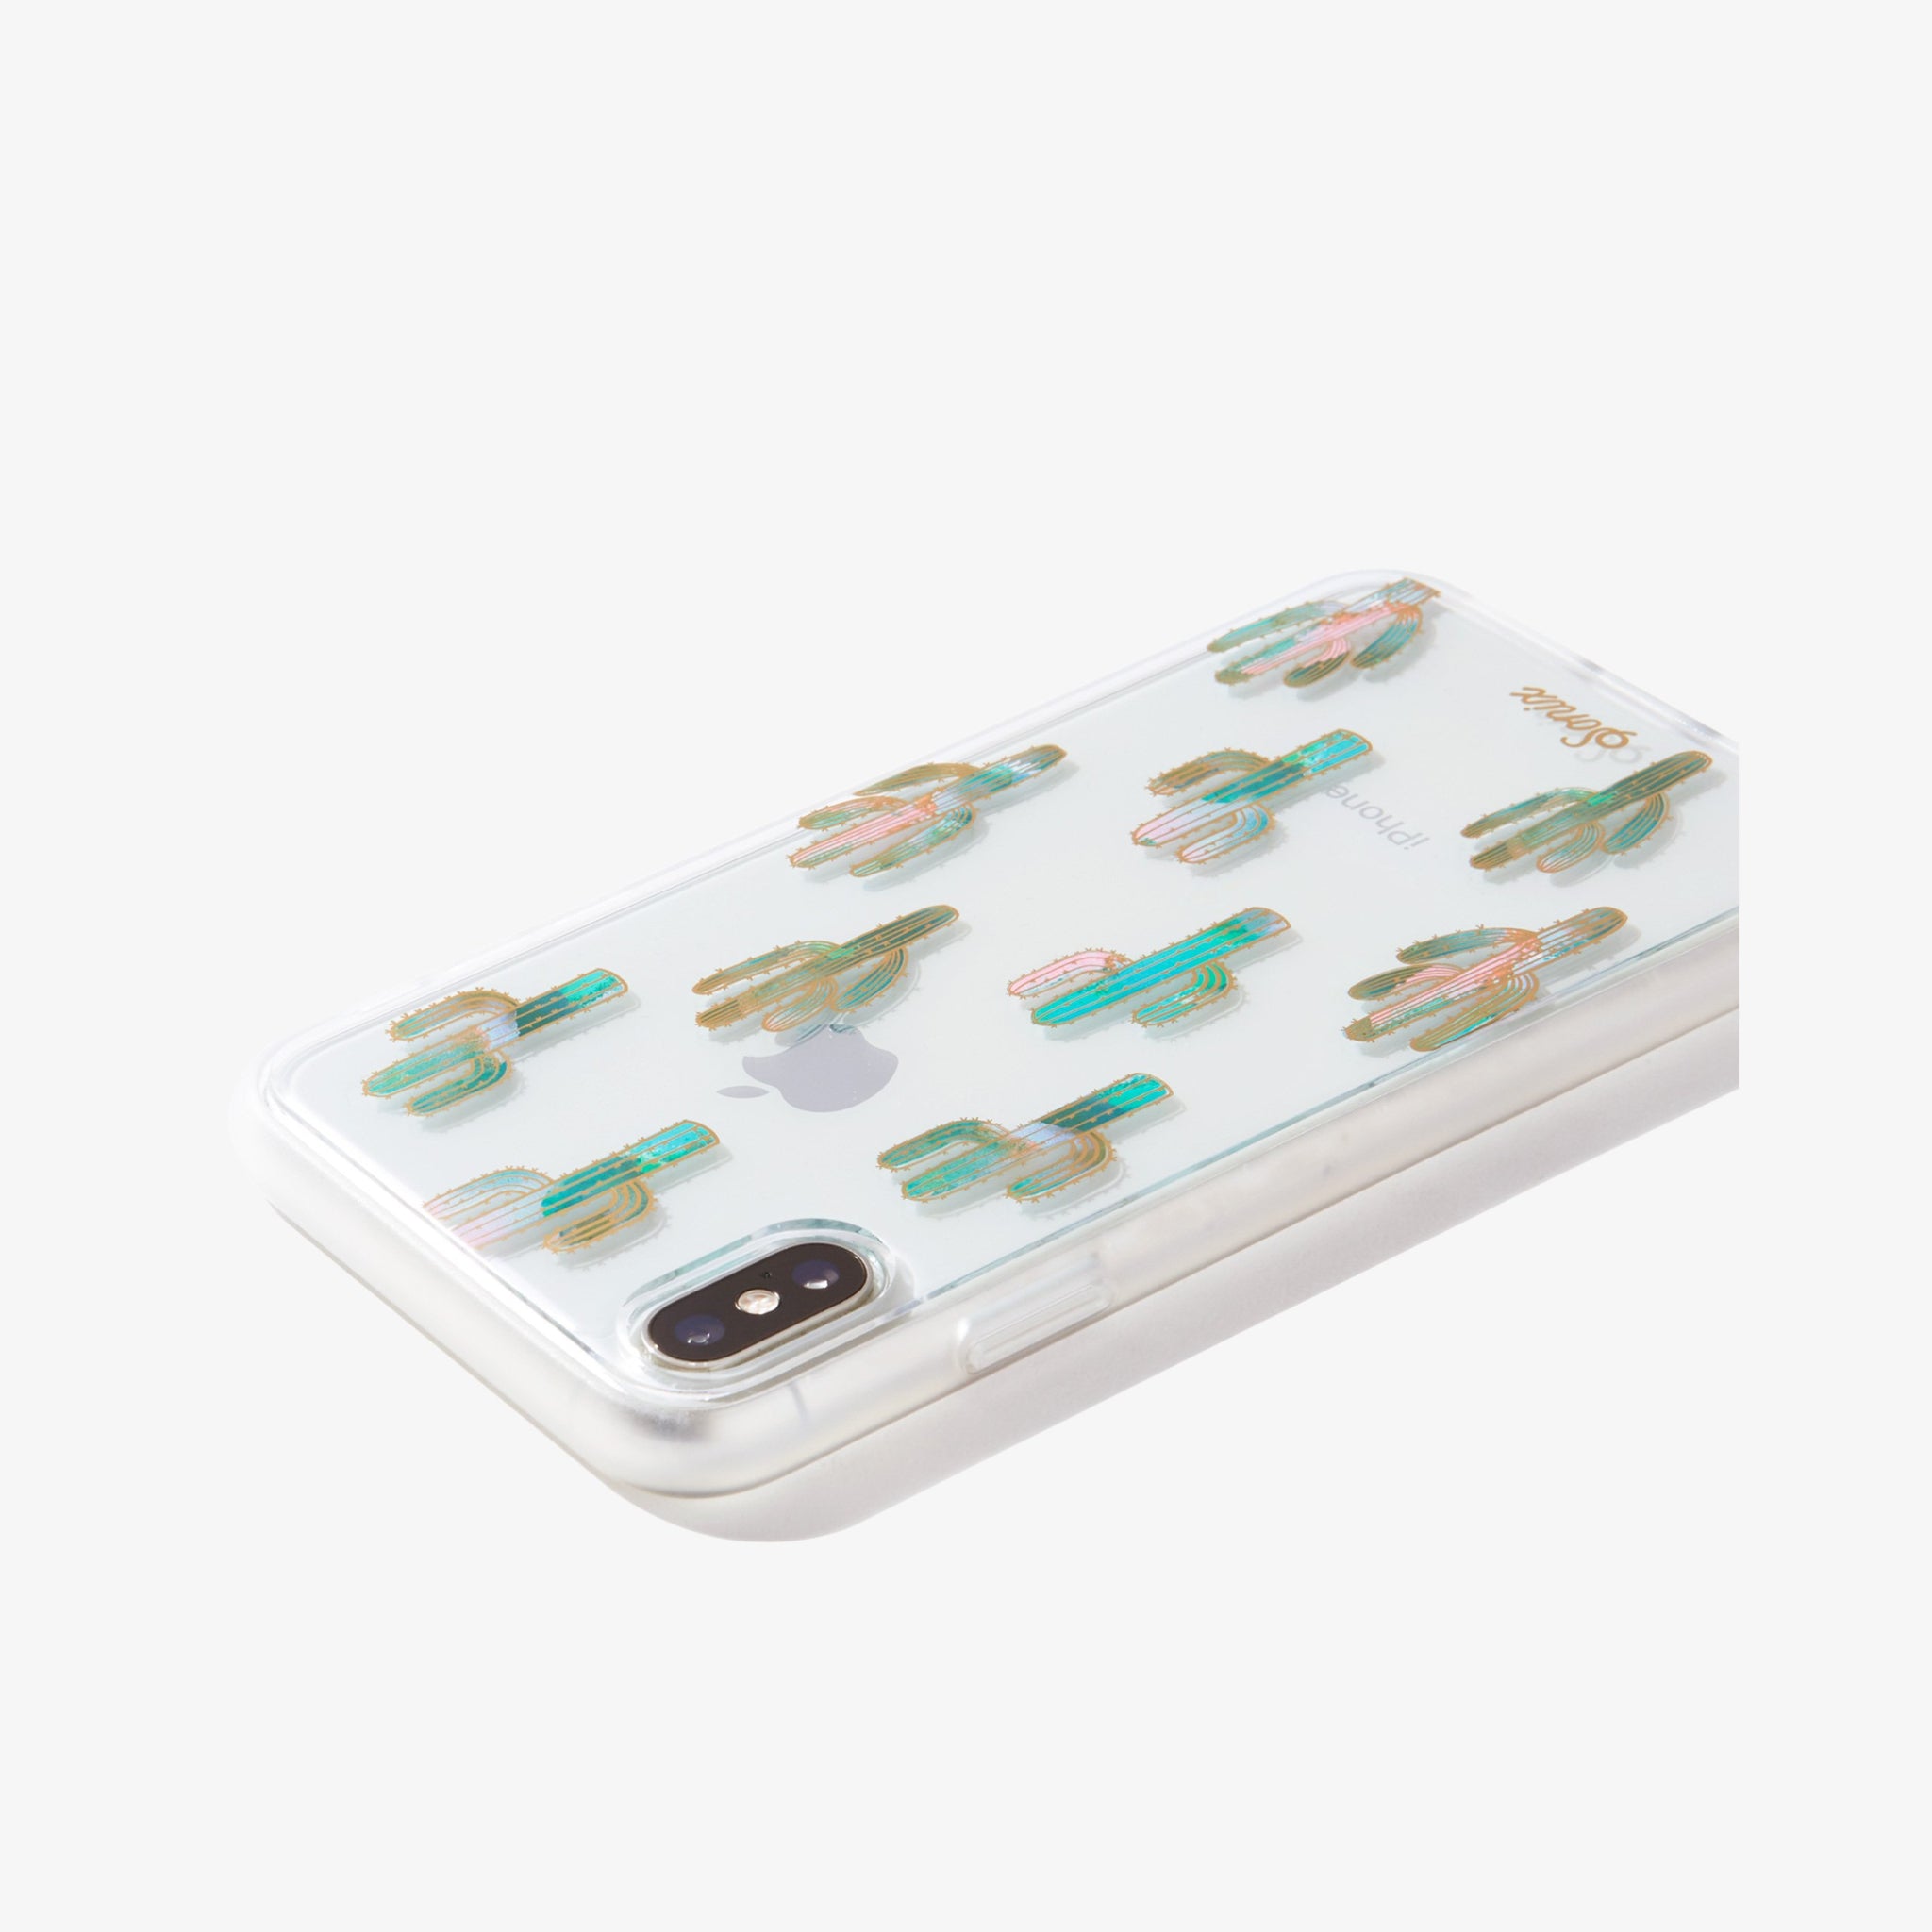 holographic cactus print shown on an iphone xs max side view